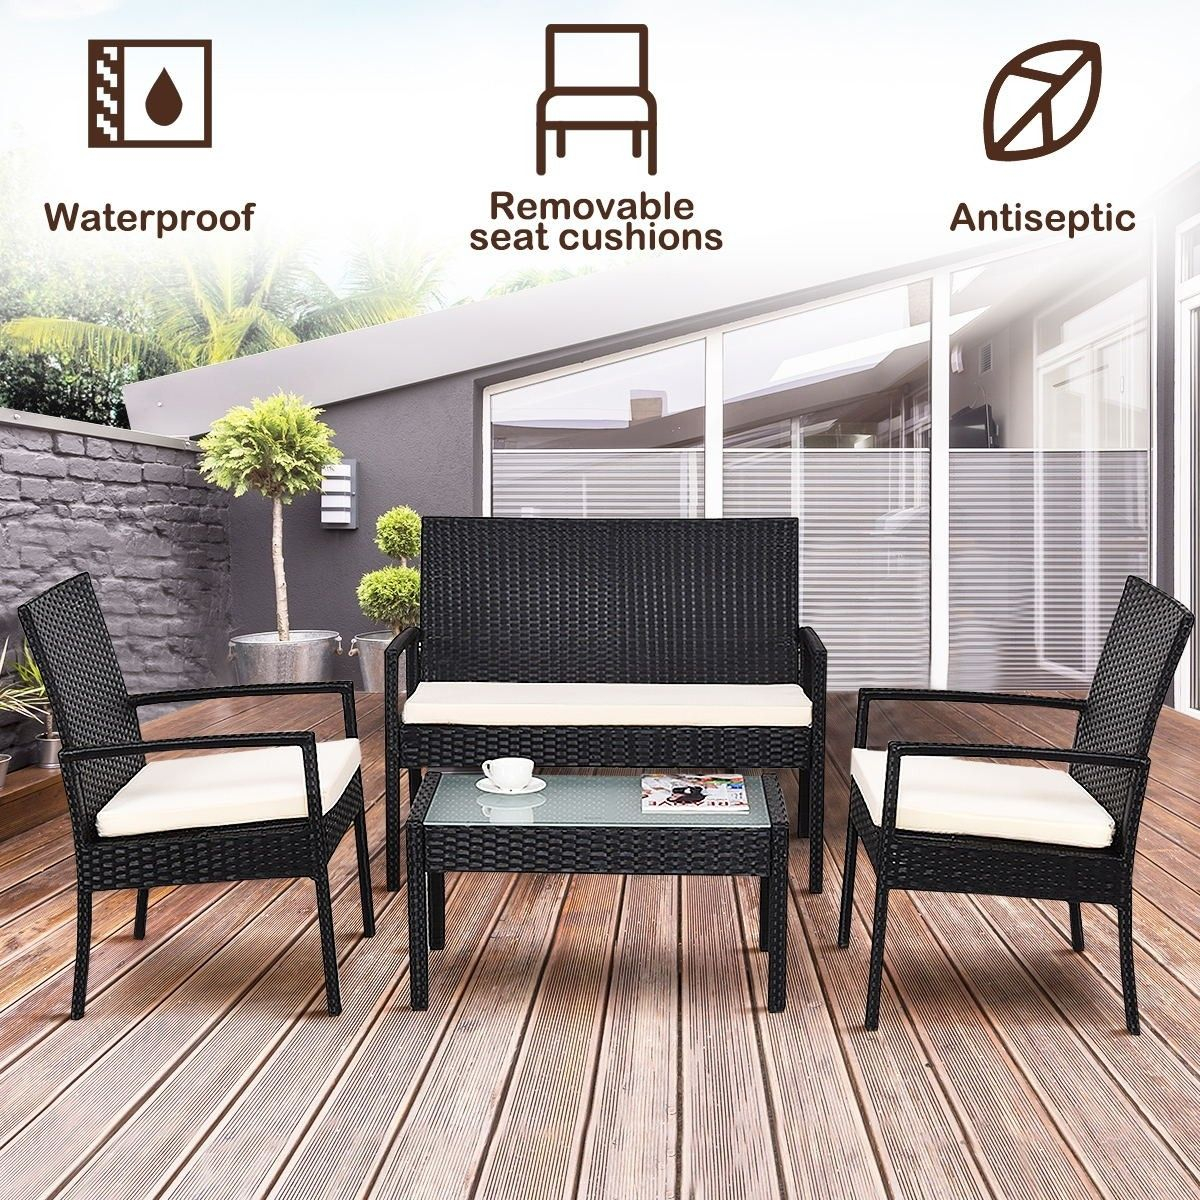 4 Pcs Outdoor Patio Furniture Set Table Chair Sofa Cushioned in sizing 1200 X 1200